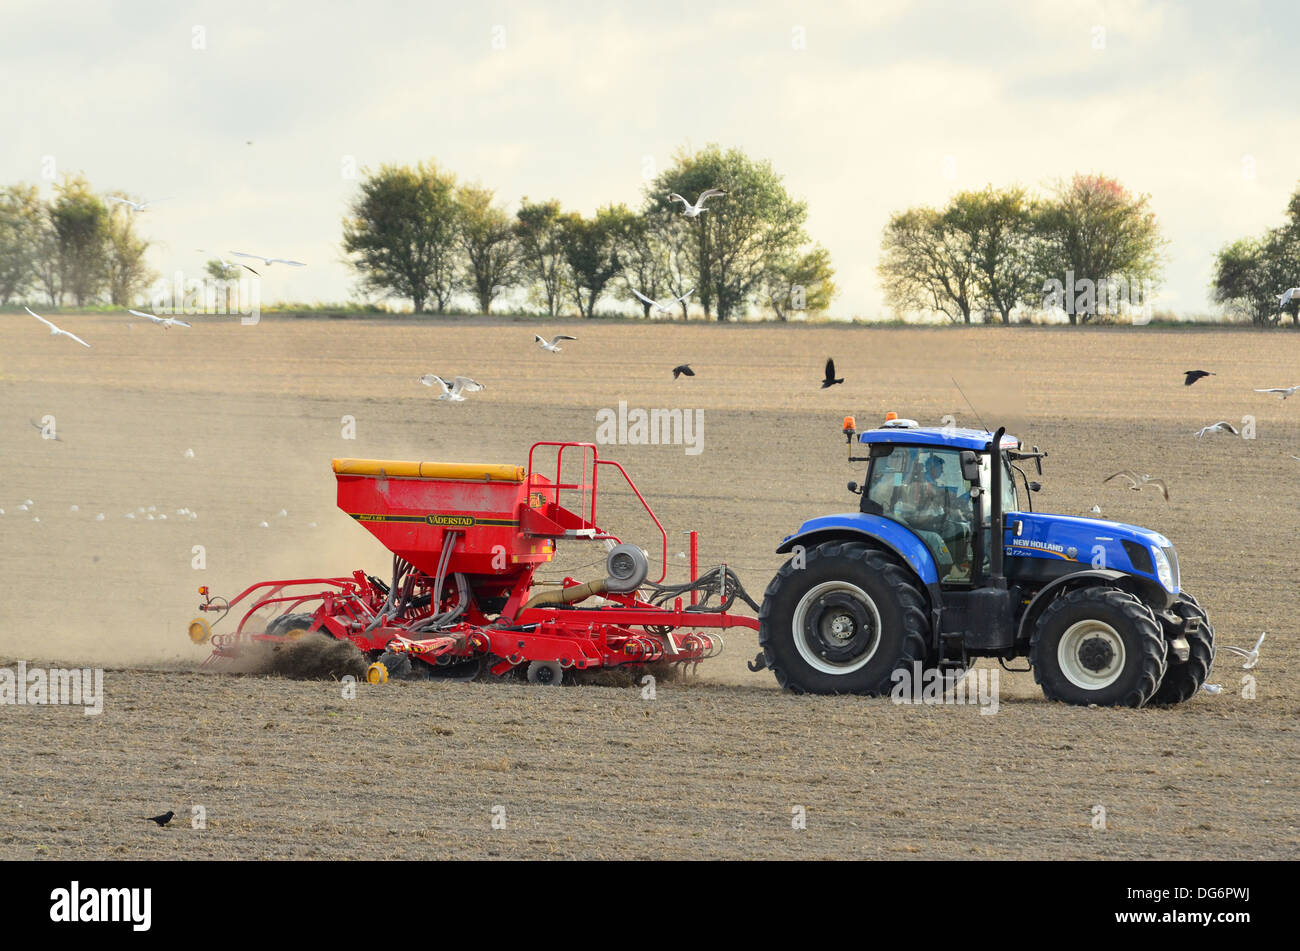 Tractor pulling seed planter through a field followed by birds Stock Photo